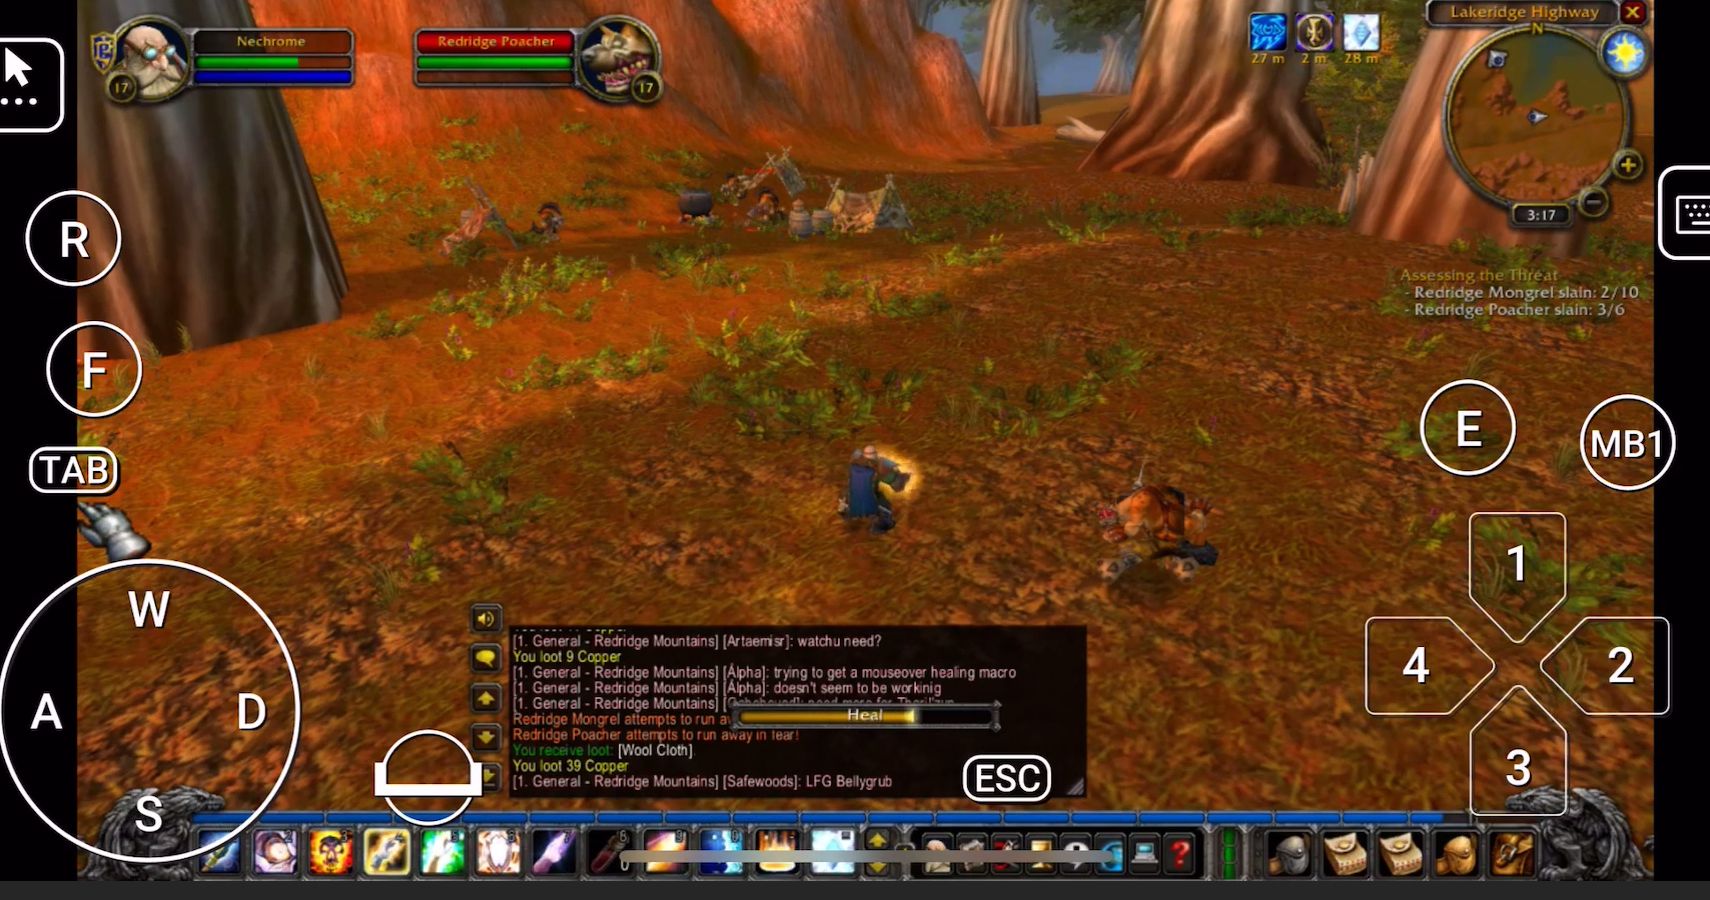 You Can Now Play WoW Classic On Your Nintendo Switch With A Little Work